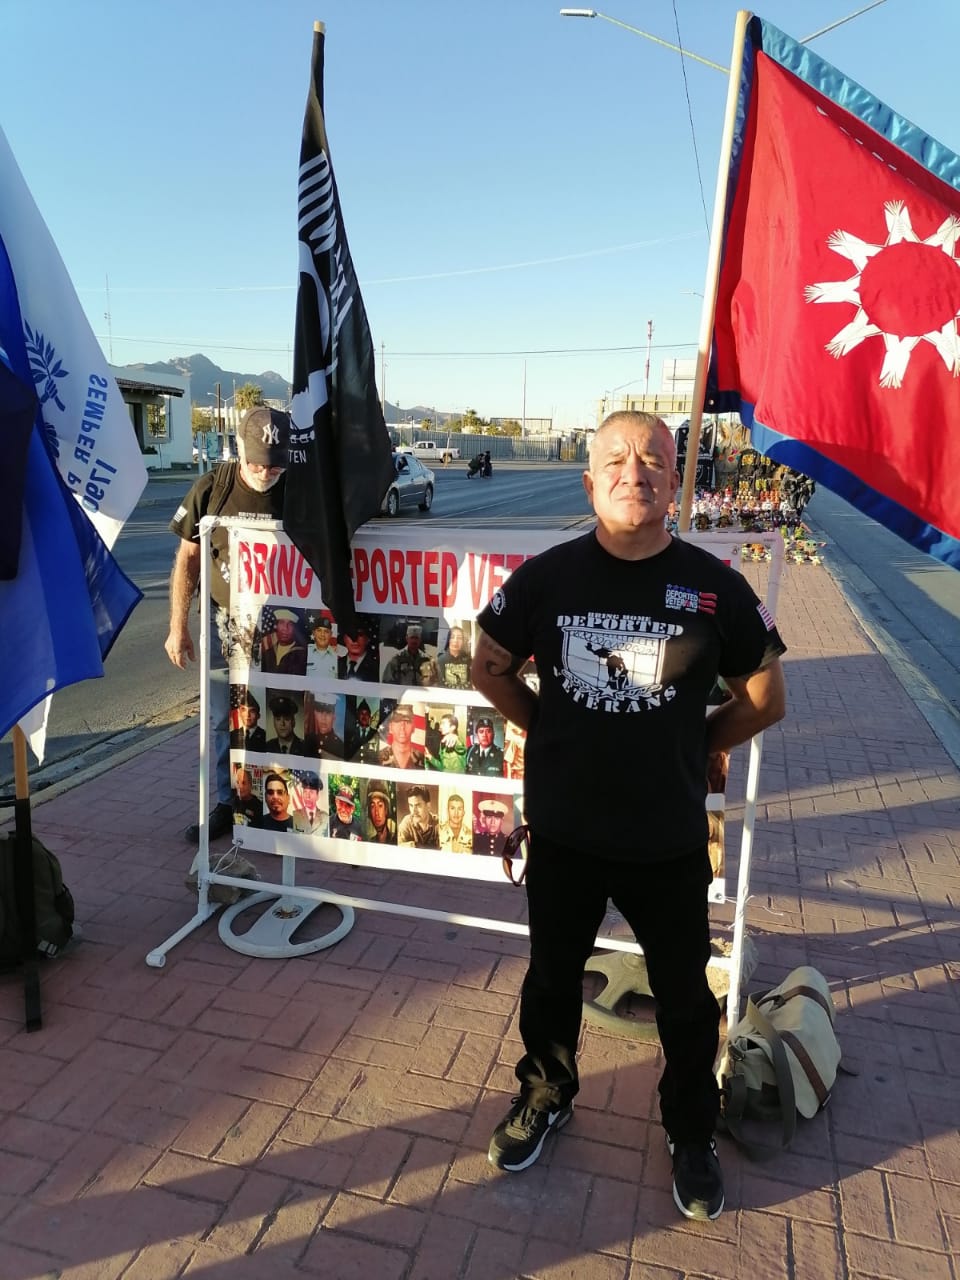 Marcelino Ramos, a 54 year old man, stands in front of a banner that has flags behind it and photos of deported veterans on the front. He is wearing a black tshirt and black pants.